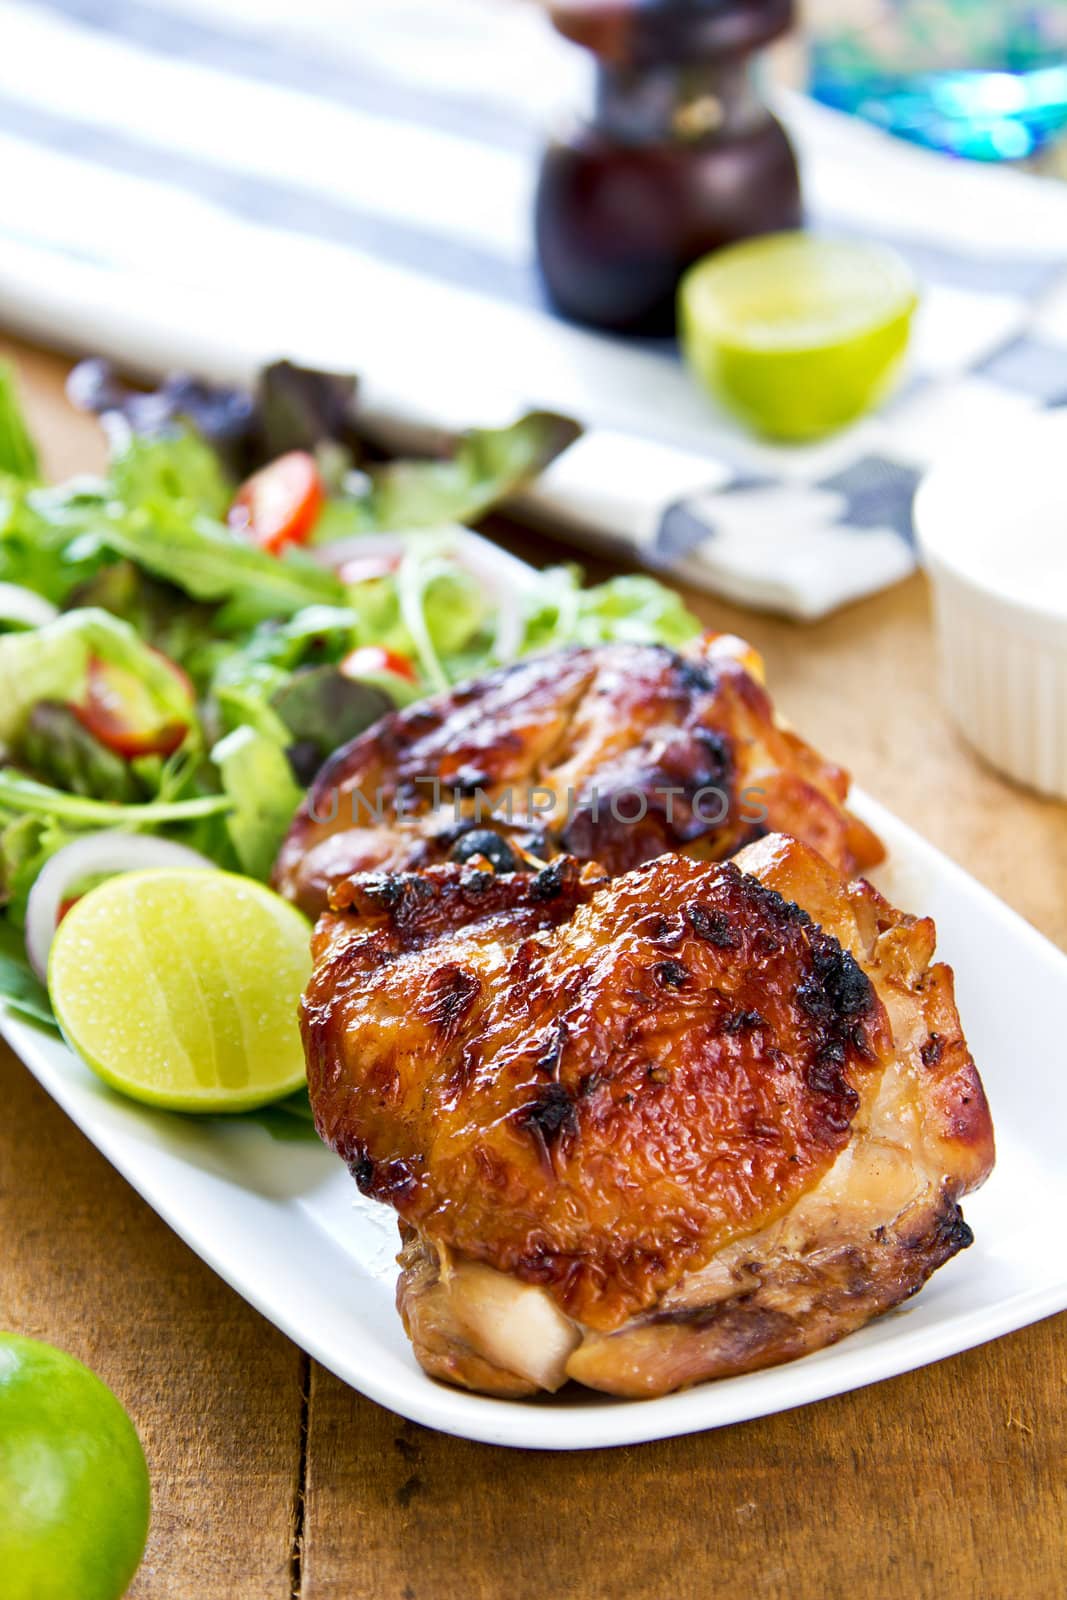 Grilled chicken with salad  by vanillaechoes